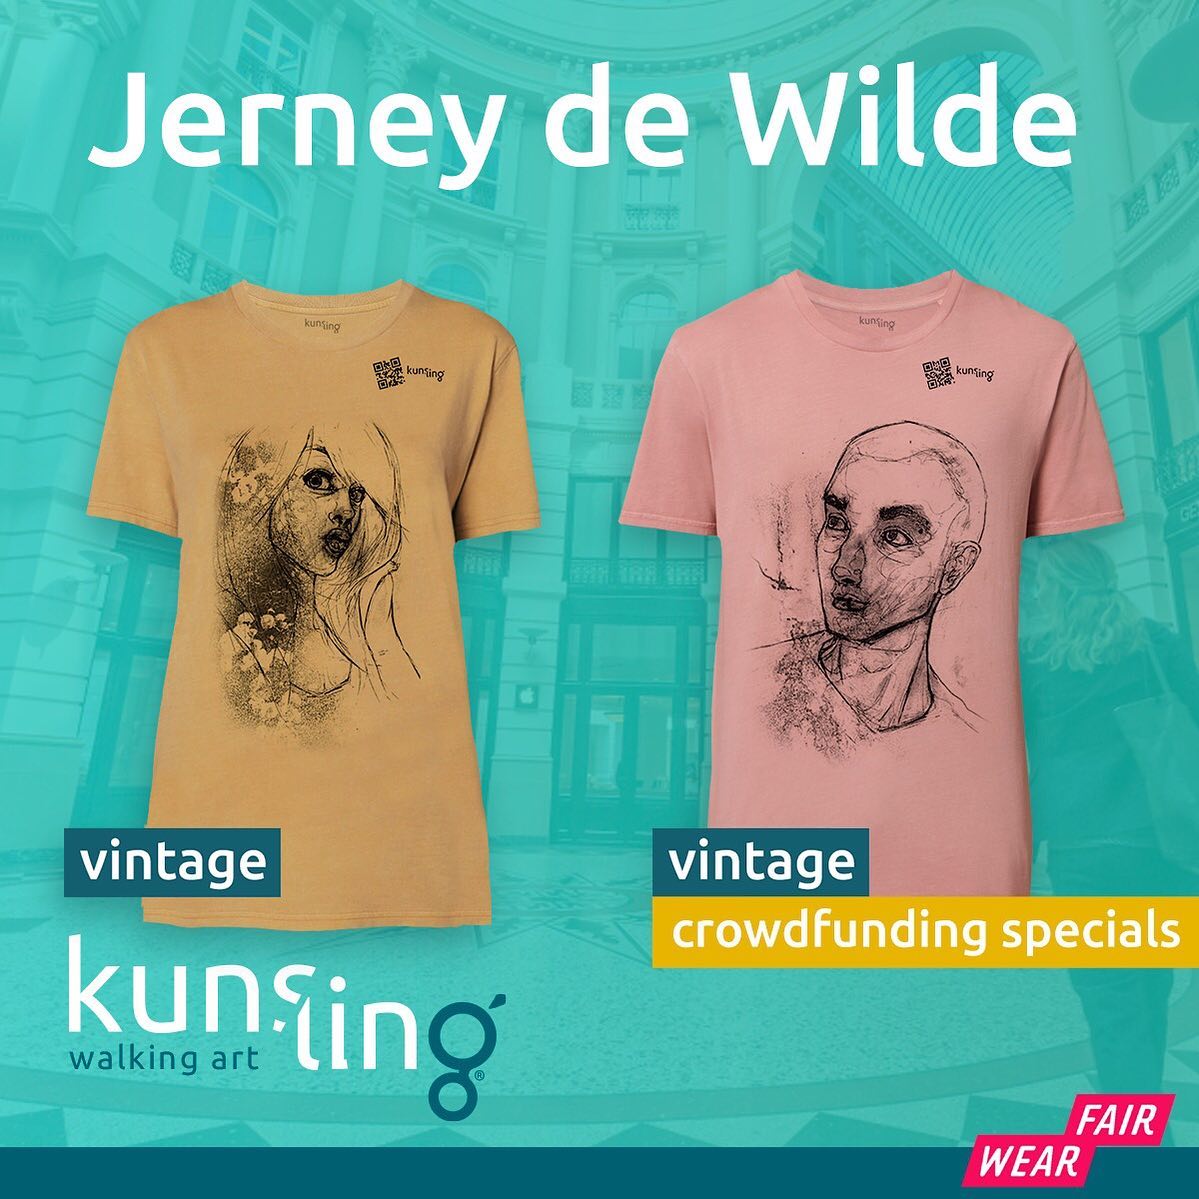 I would like to make some noise for a supercool project I’m a part of: Kunsling! Organic and sustainable clothing with quality prints of fine art pieces, linked to original art by QR. At the moment we are doing a Crowfdfunding at @voordekunst to start it all up with a selection of shirts/hoodies/longsleeves and these two are available with my designs! Go get them or one of the other cool designs and support this project :) Thank you! ????Go to https://www.kunsling.nl/fundraiser/ or check out @kunslingstore for more info :)#sustainablefashion #walkingart #tshirts #voordekunst #fundraiser #buylocal #supportsmallbusiness